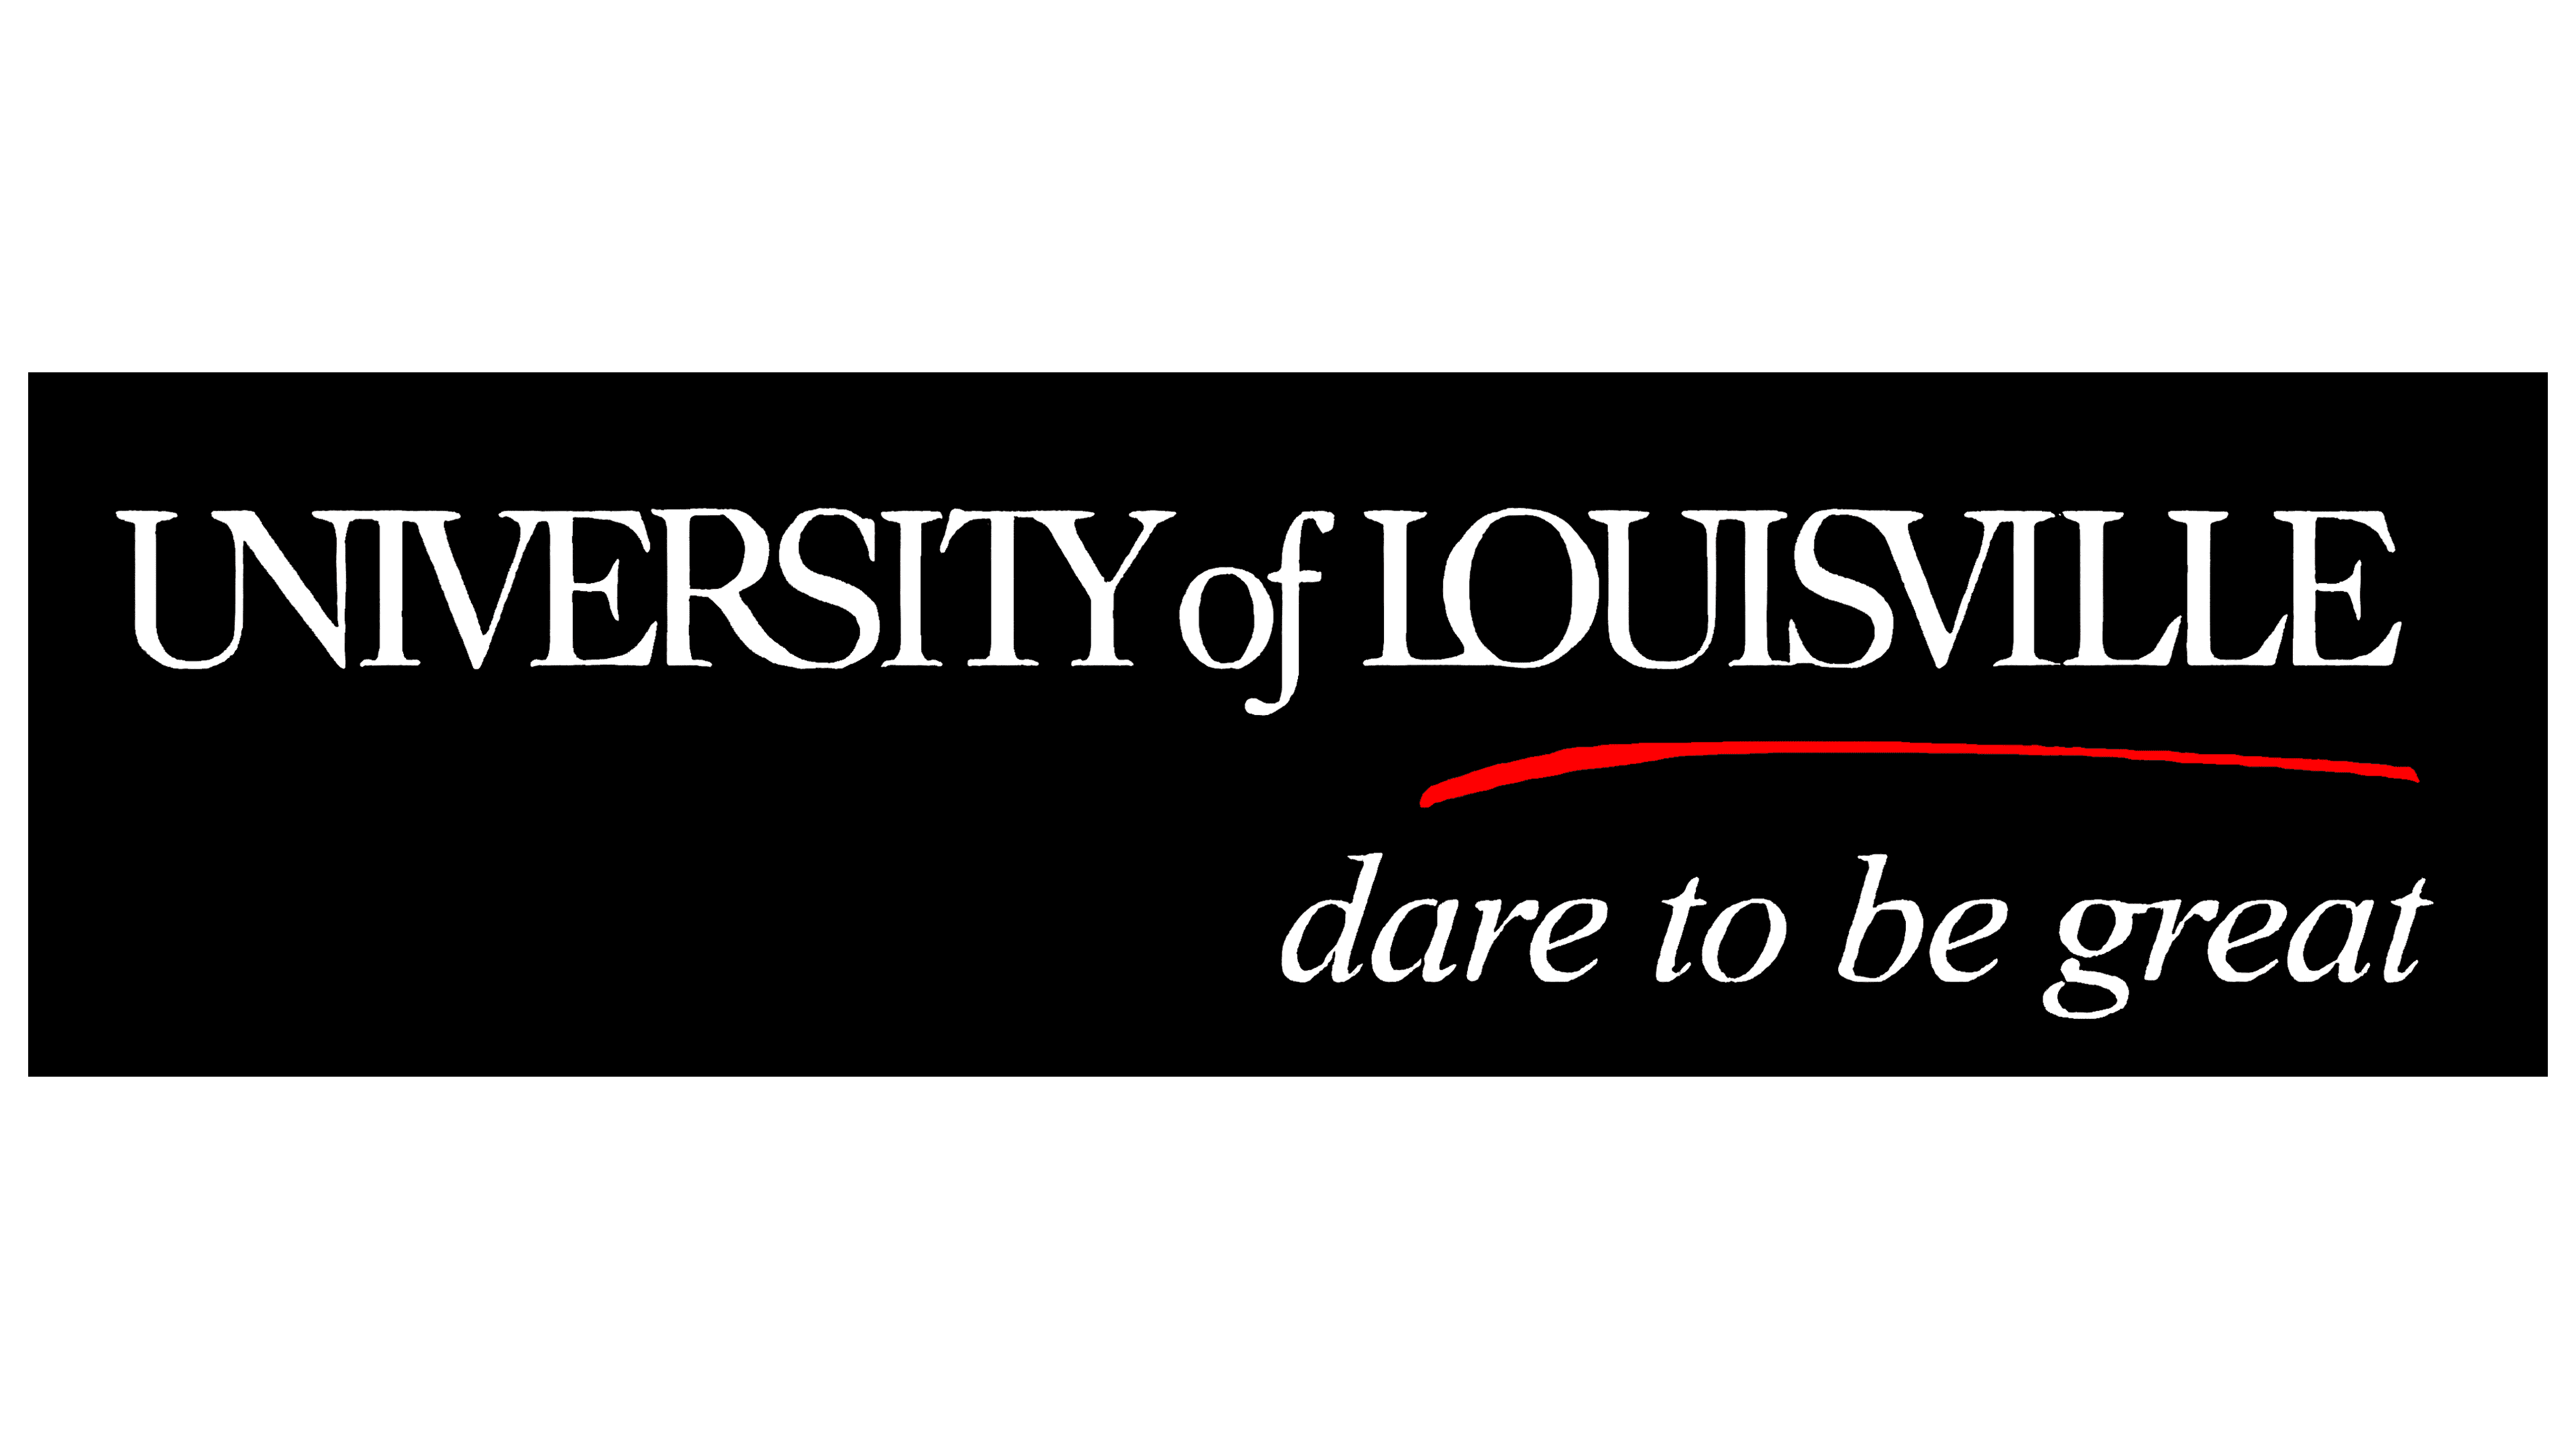  University of Louisville Official One Color Logo